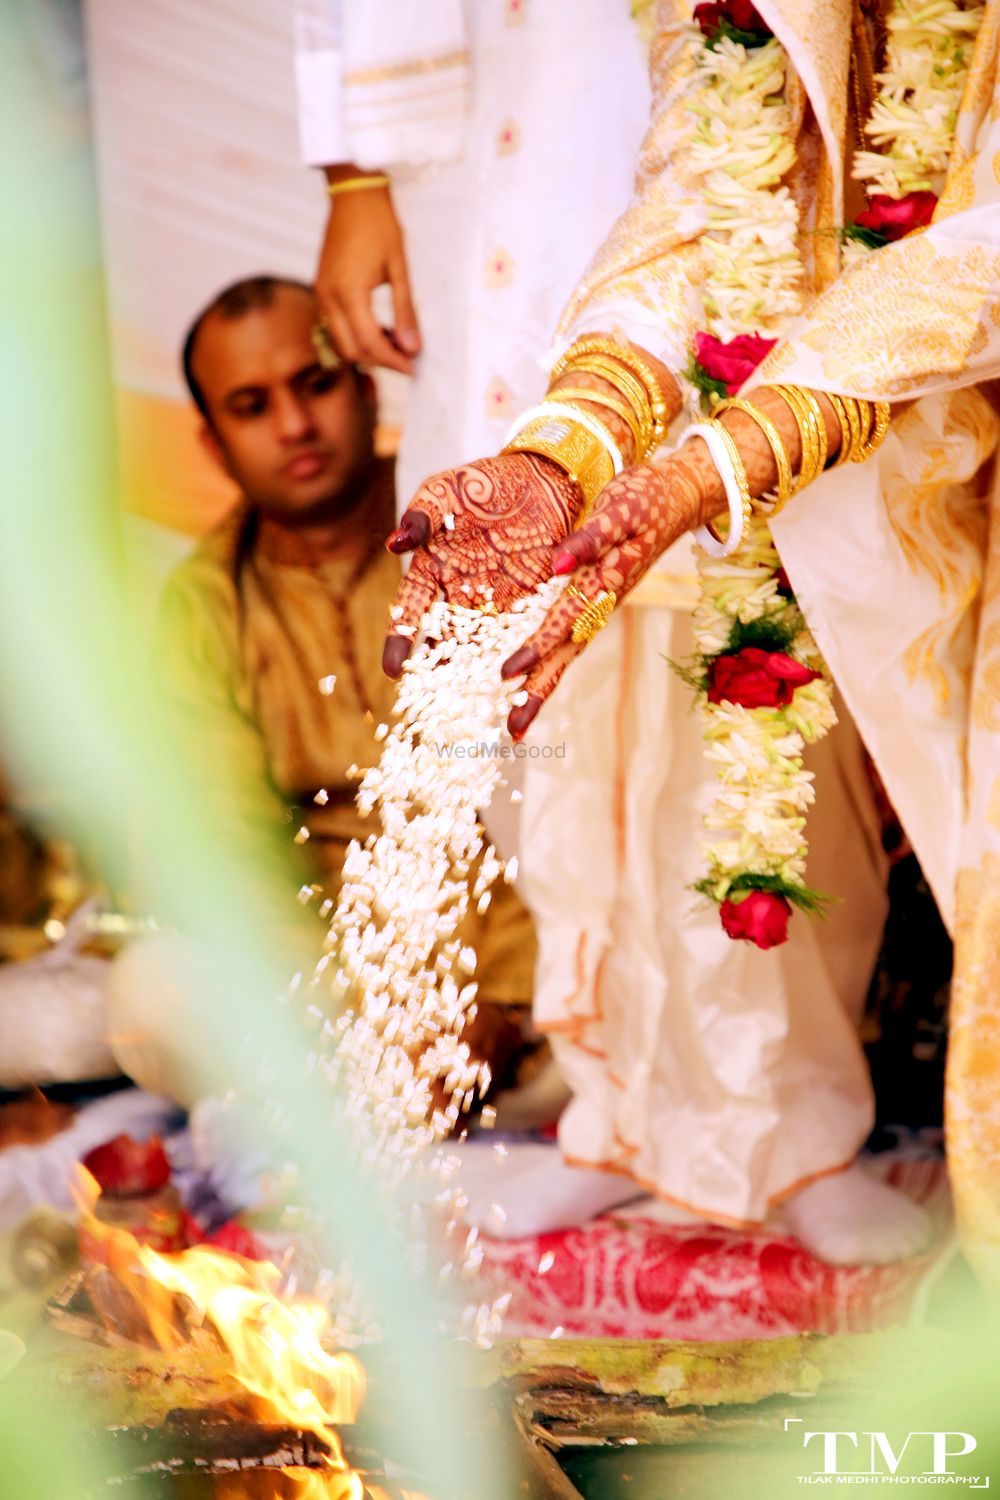 Photo From The colour of wedding - By Tilak Medhi Photography